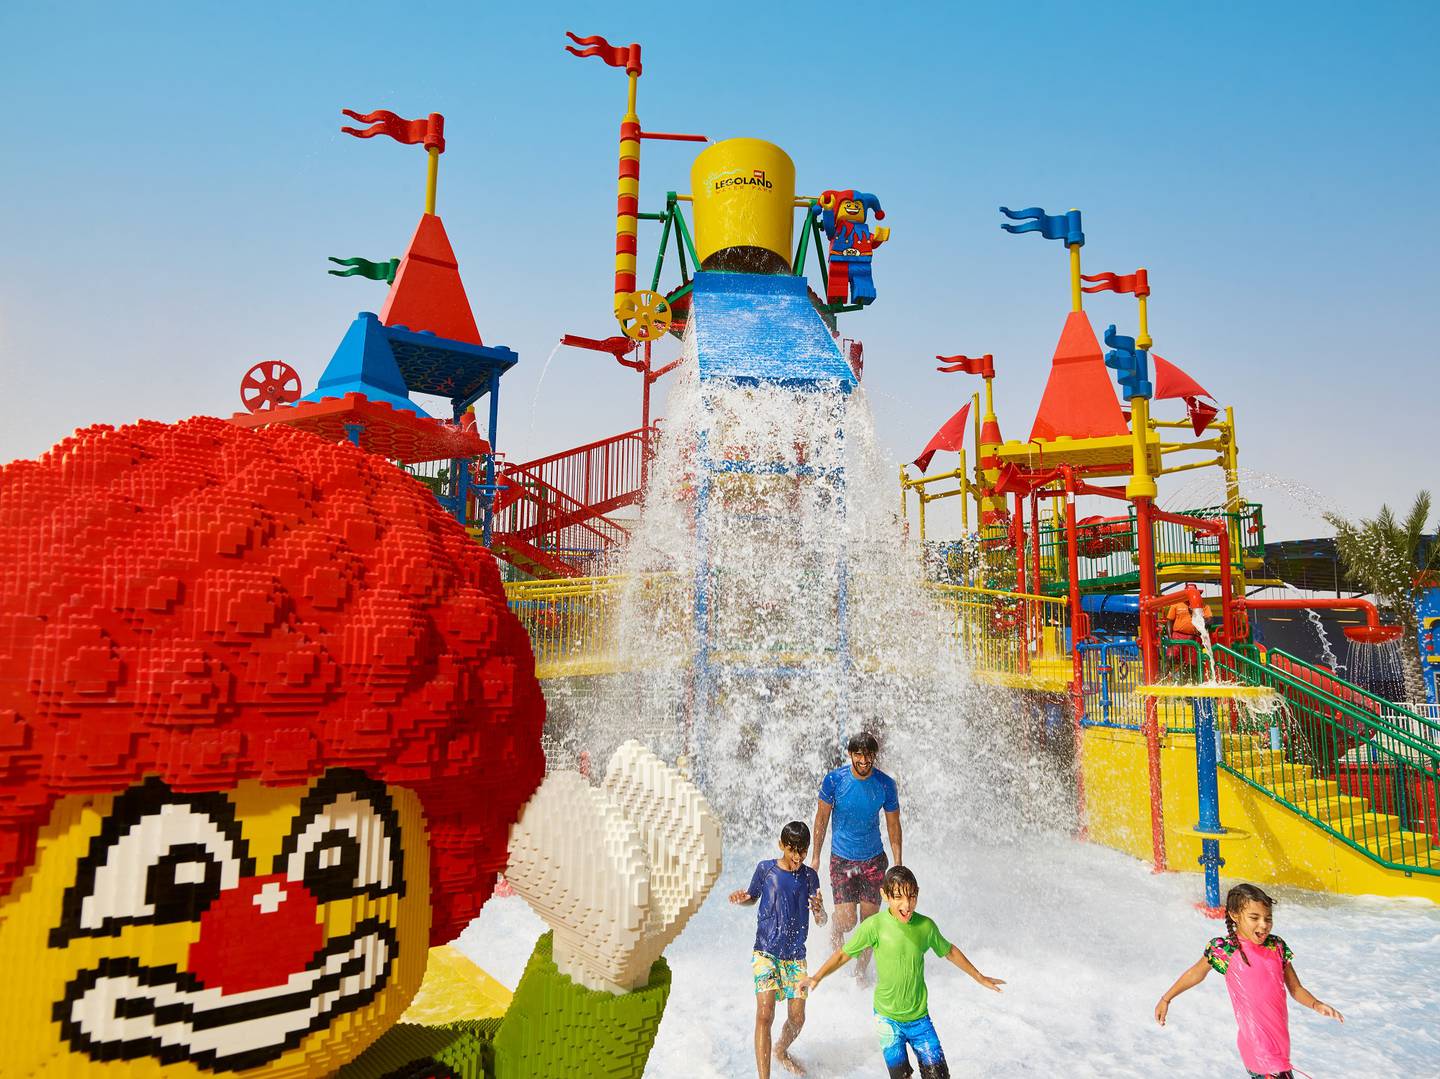 Hit one of the 20 water slides and attractions designed for families with children aged 2 to 12. Photo: Legoland